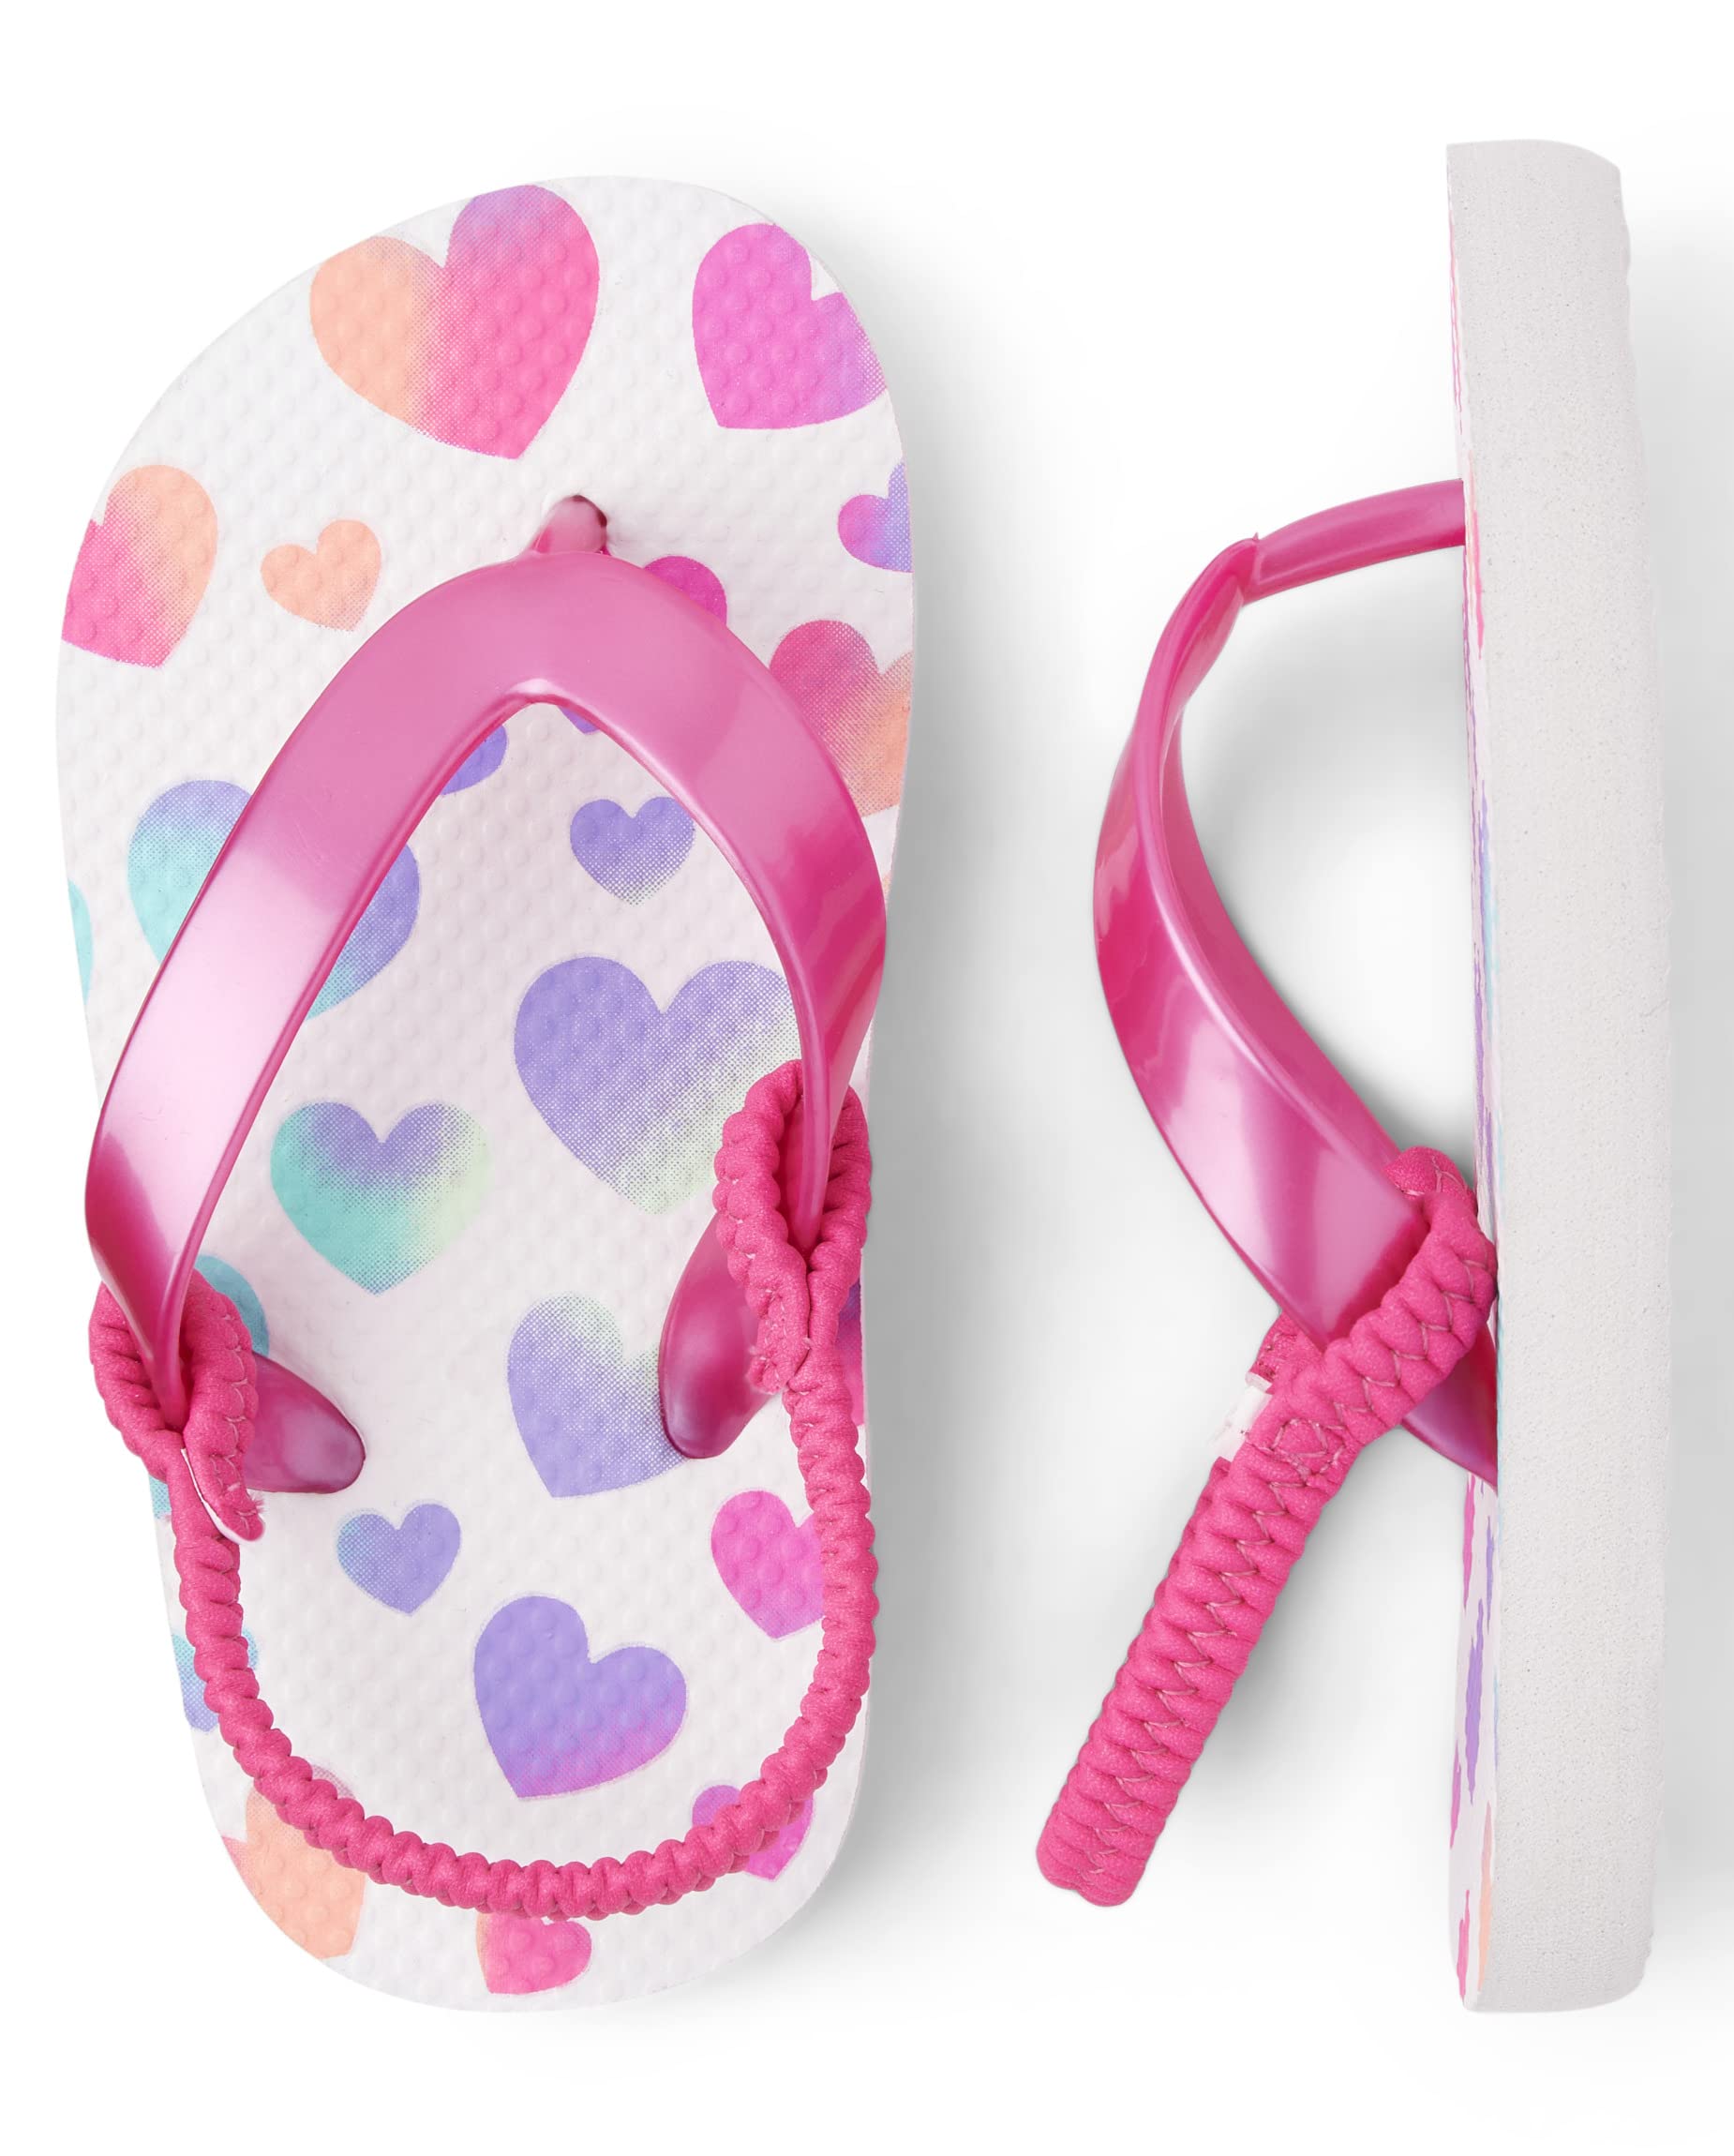 The Children's Place Unisex-Child and Toddler Girls Flip Flops with Backstrap